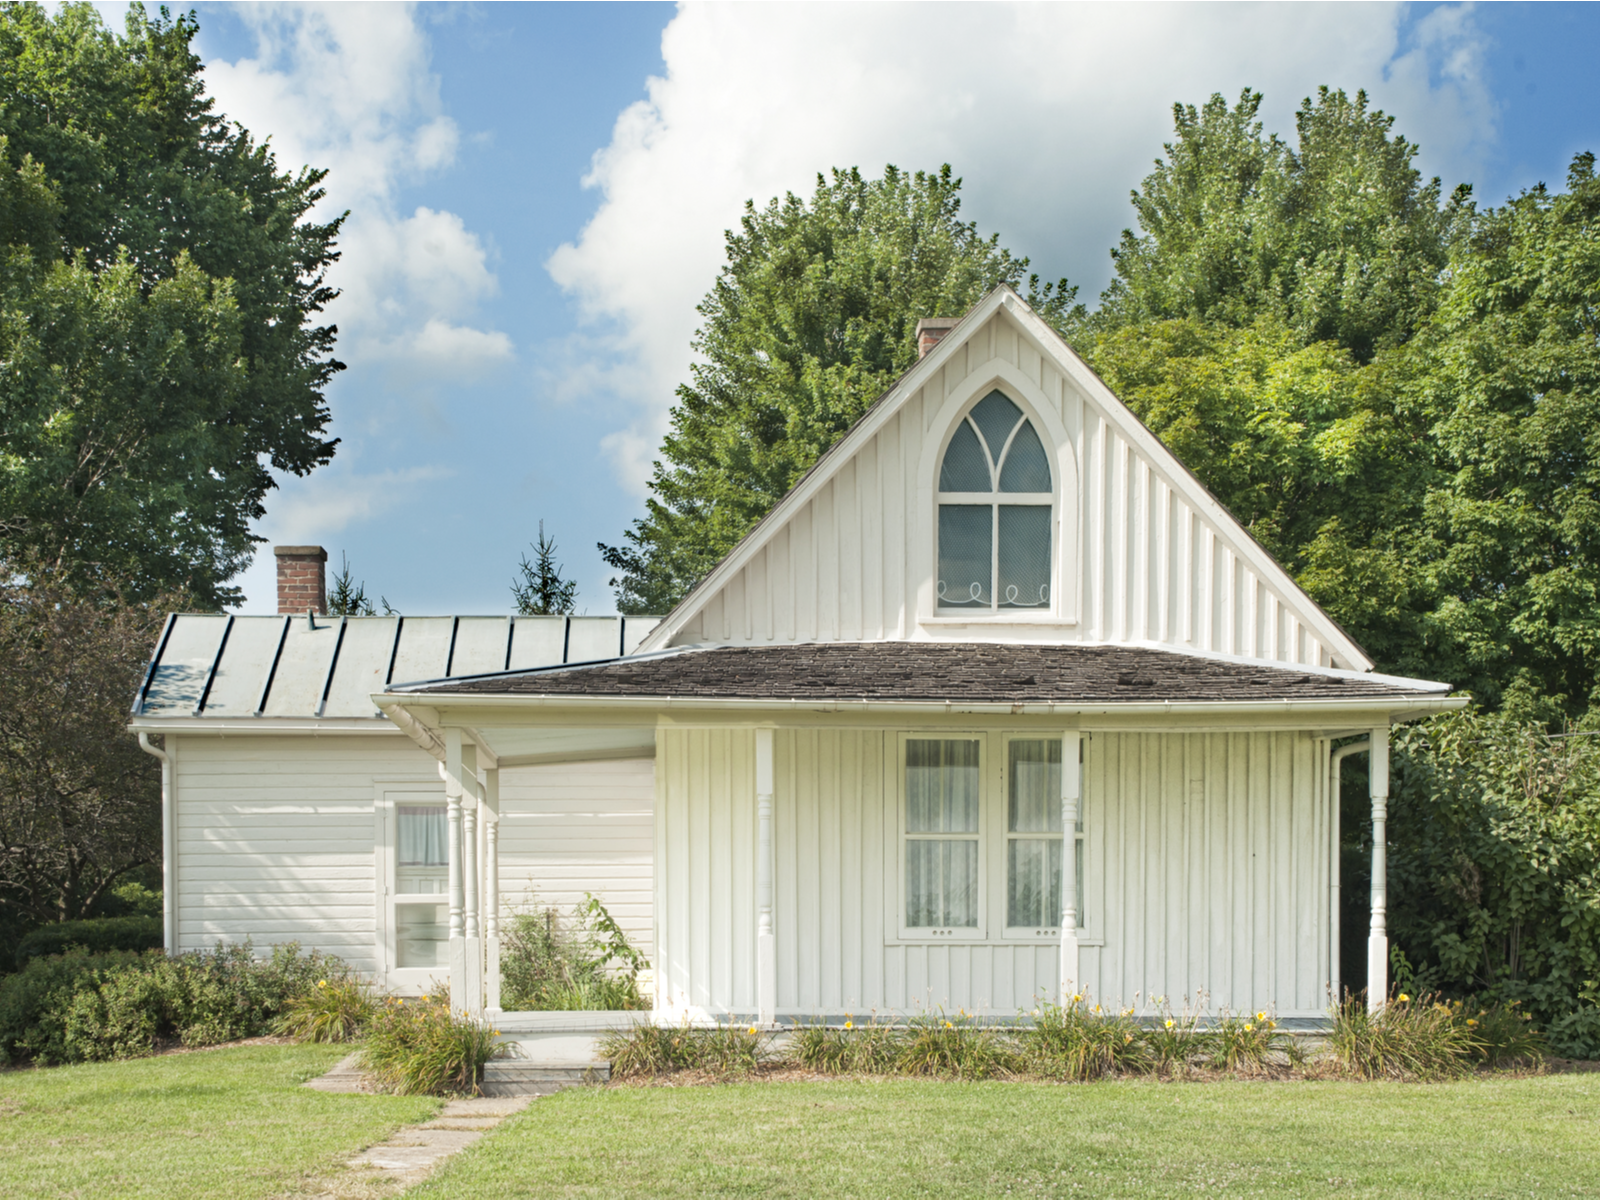 The unique architecture on American Gothic House makes it a pick for what to see in Iowa with a cream-white color exterior and a distinct upper window 